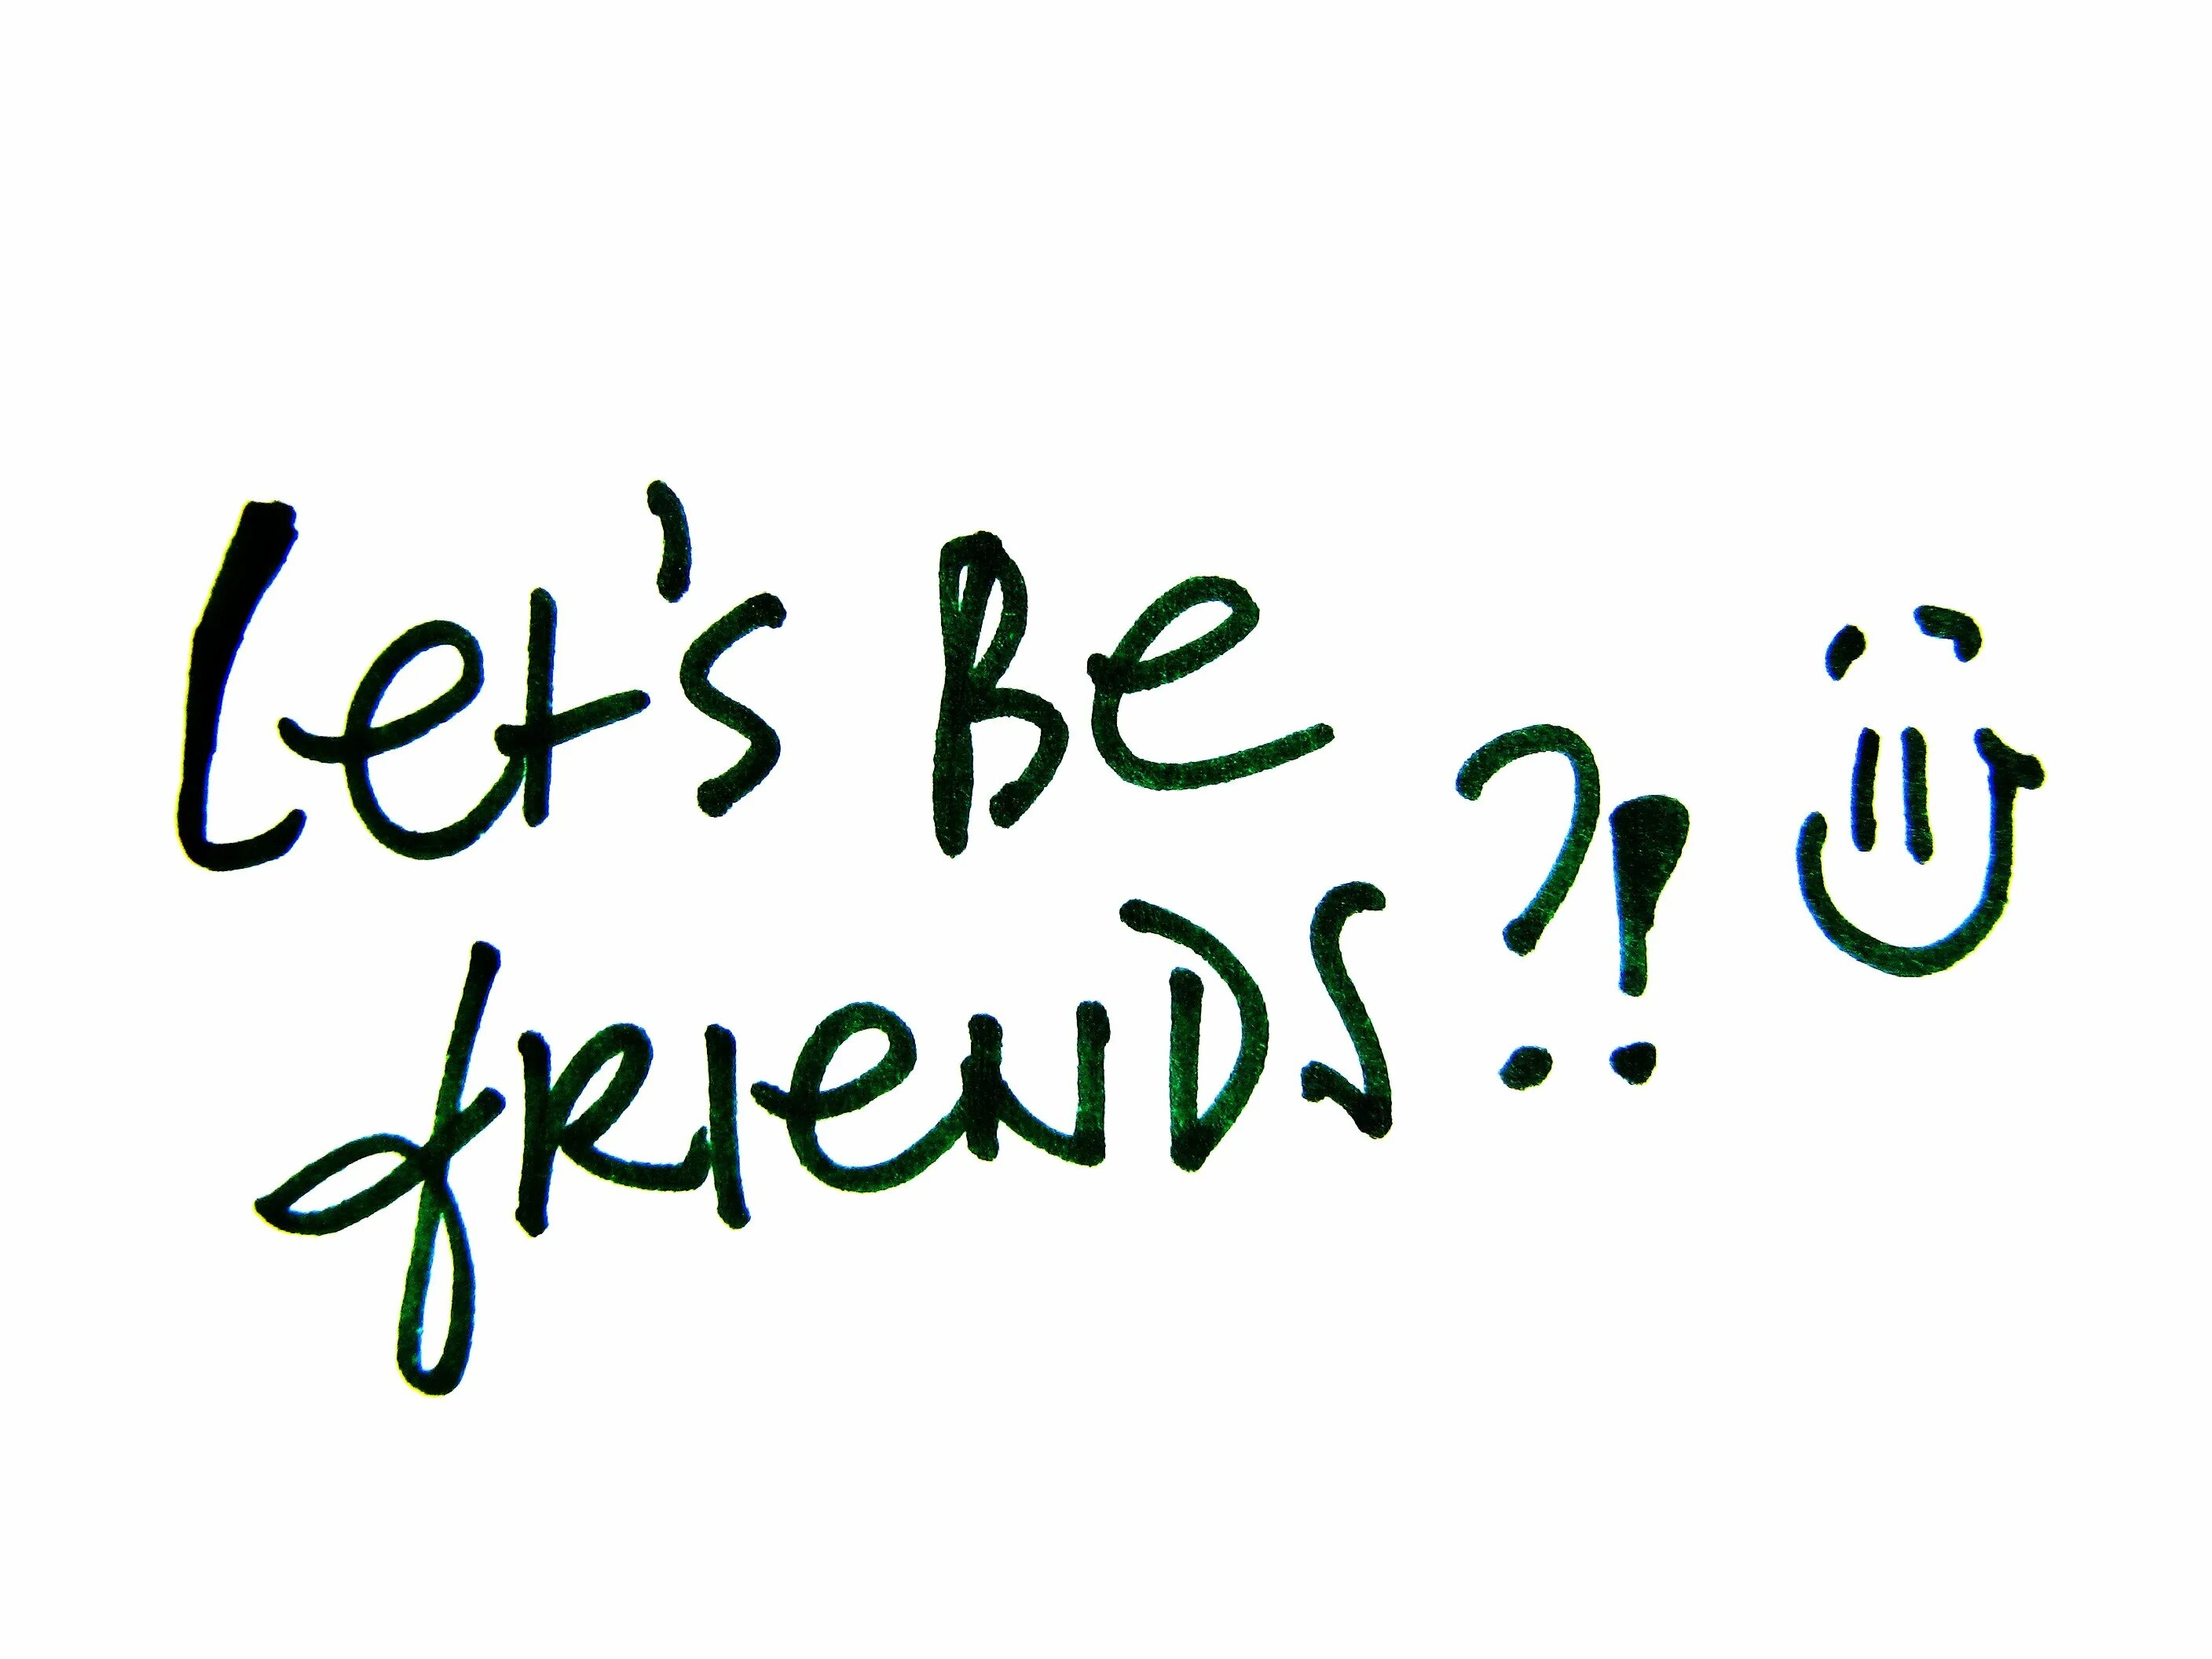 Картинки Let's be friends. Be a friend. Картинка be a friend. Let`s make friends. Easy and friends